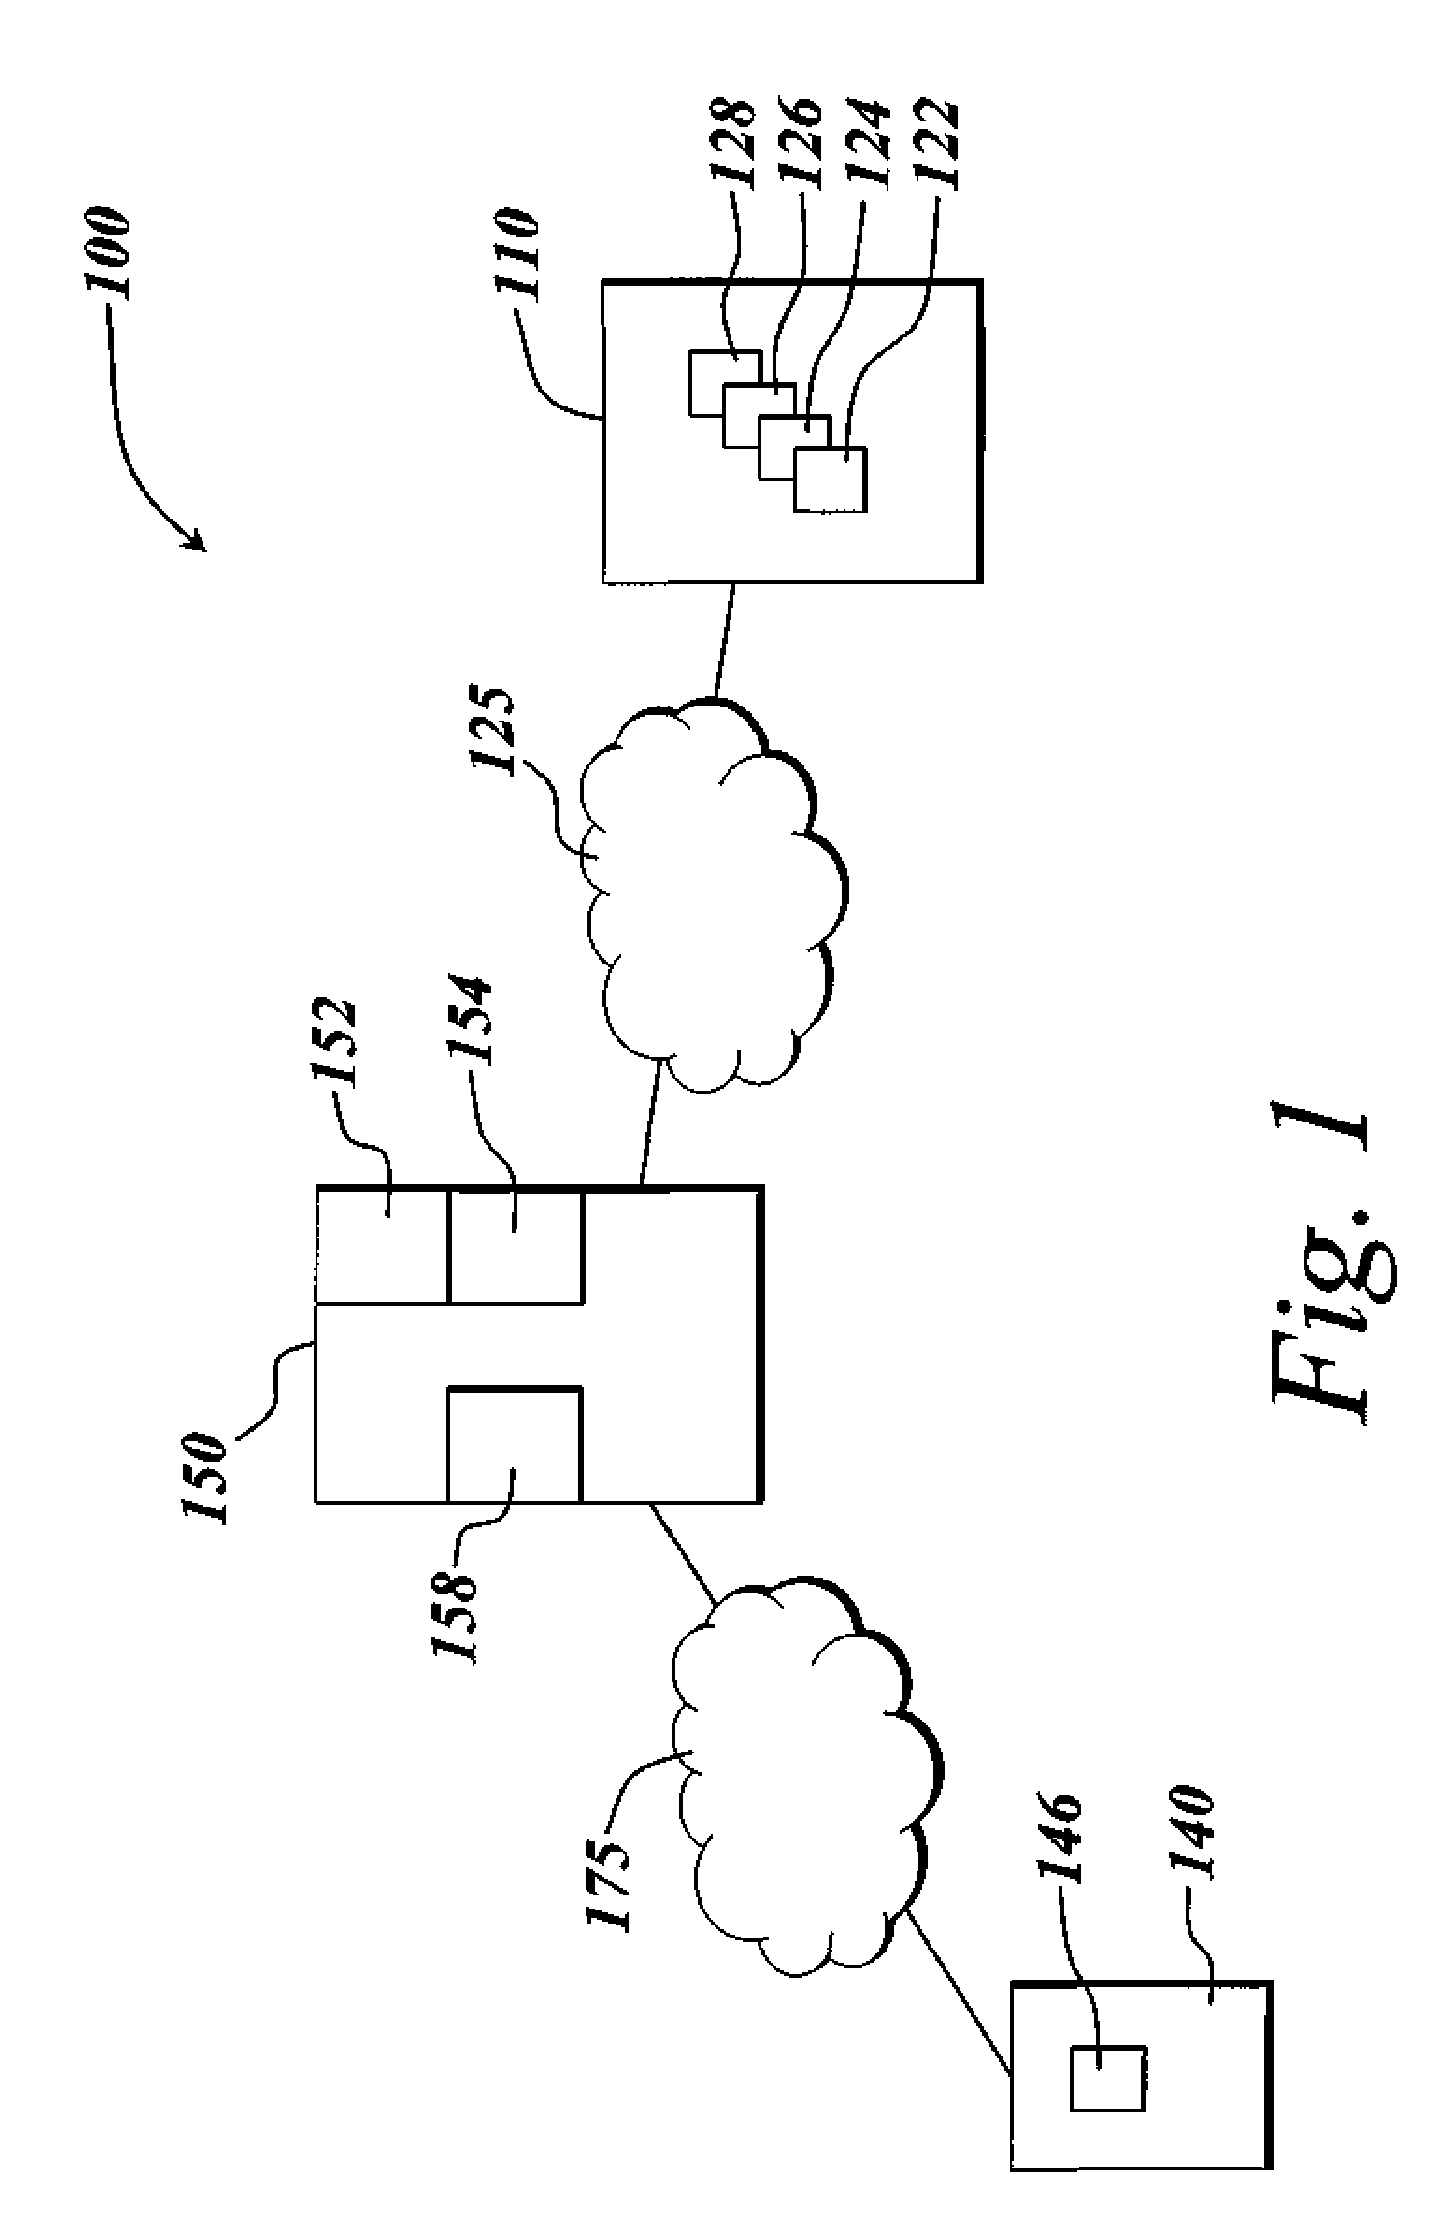 Methods and apparatus for displaying application output on devices having constrained system resources